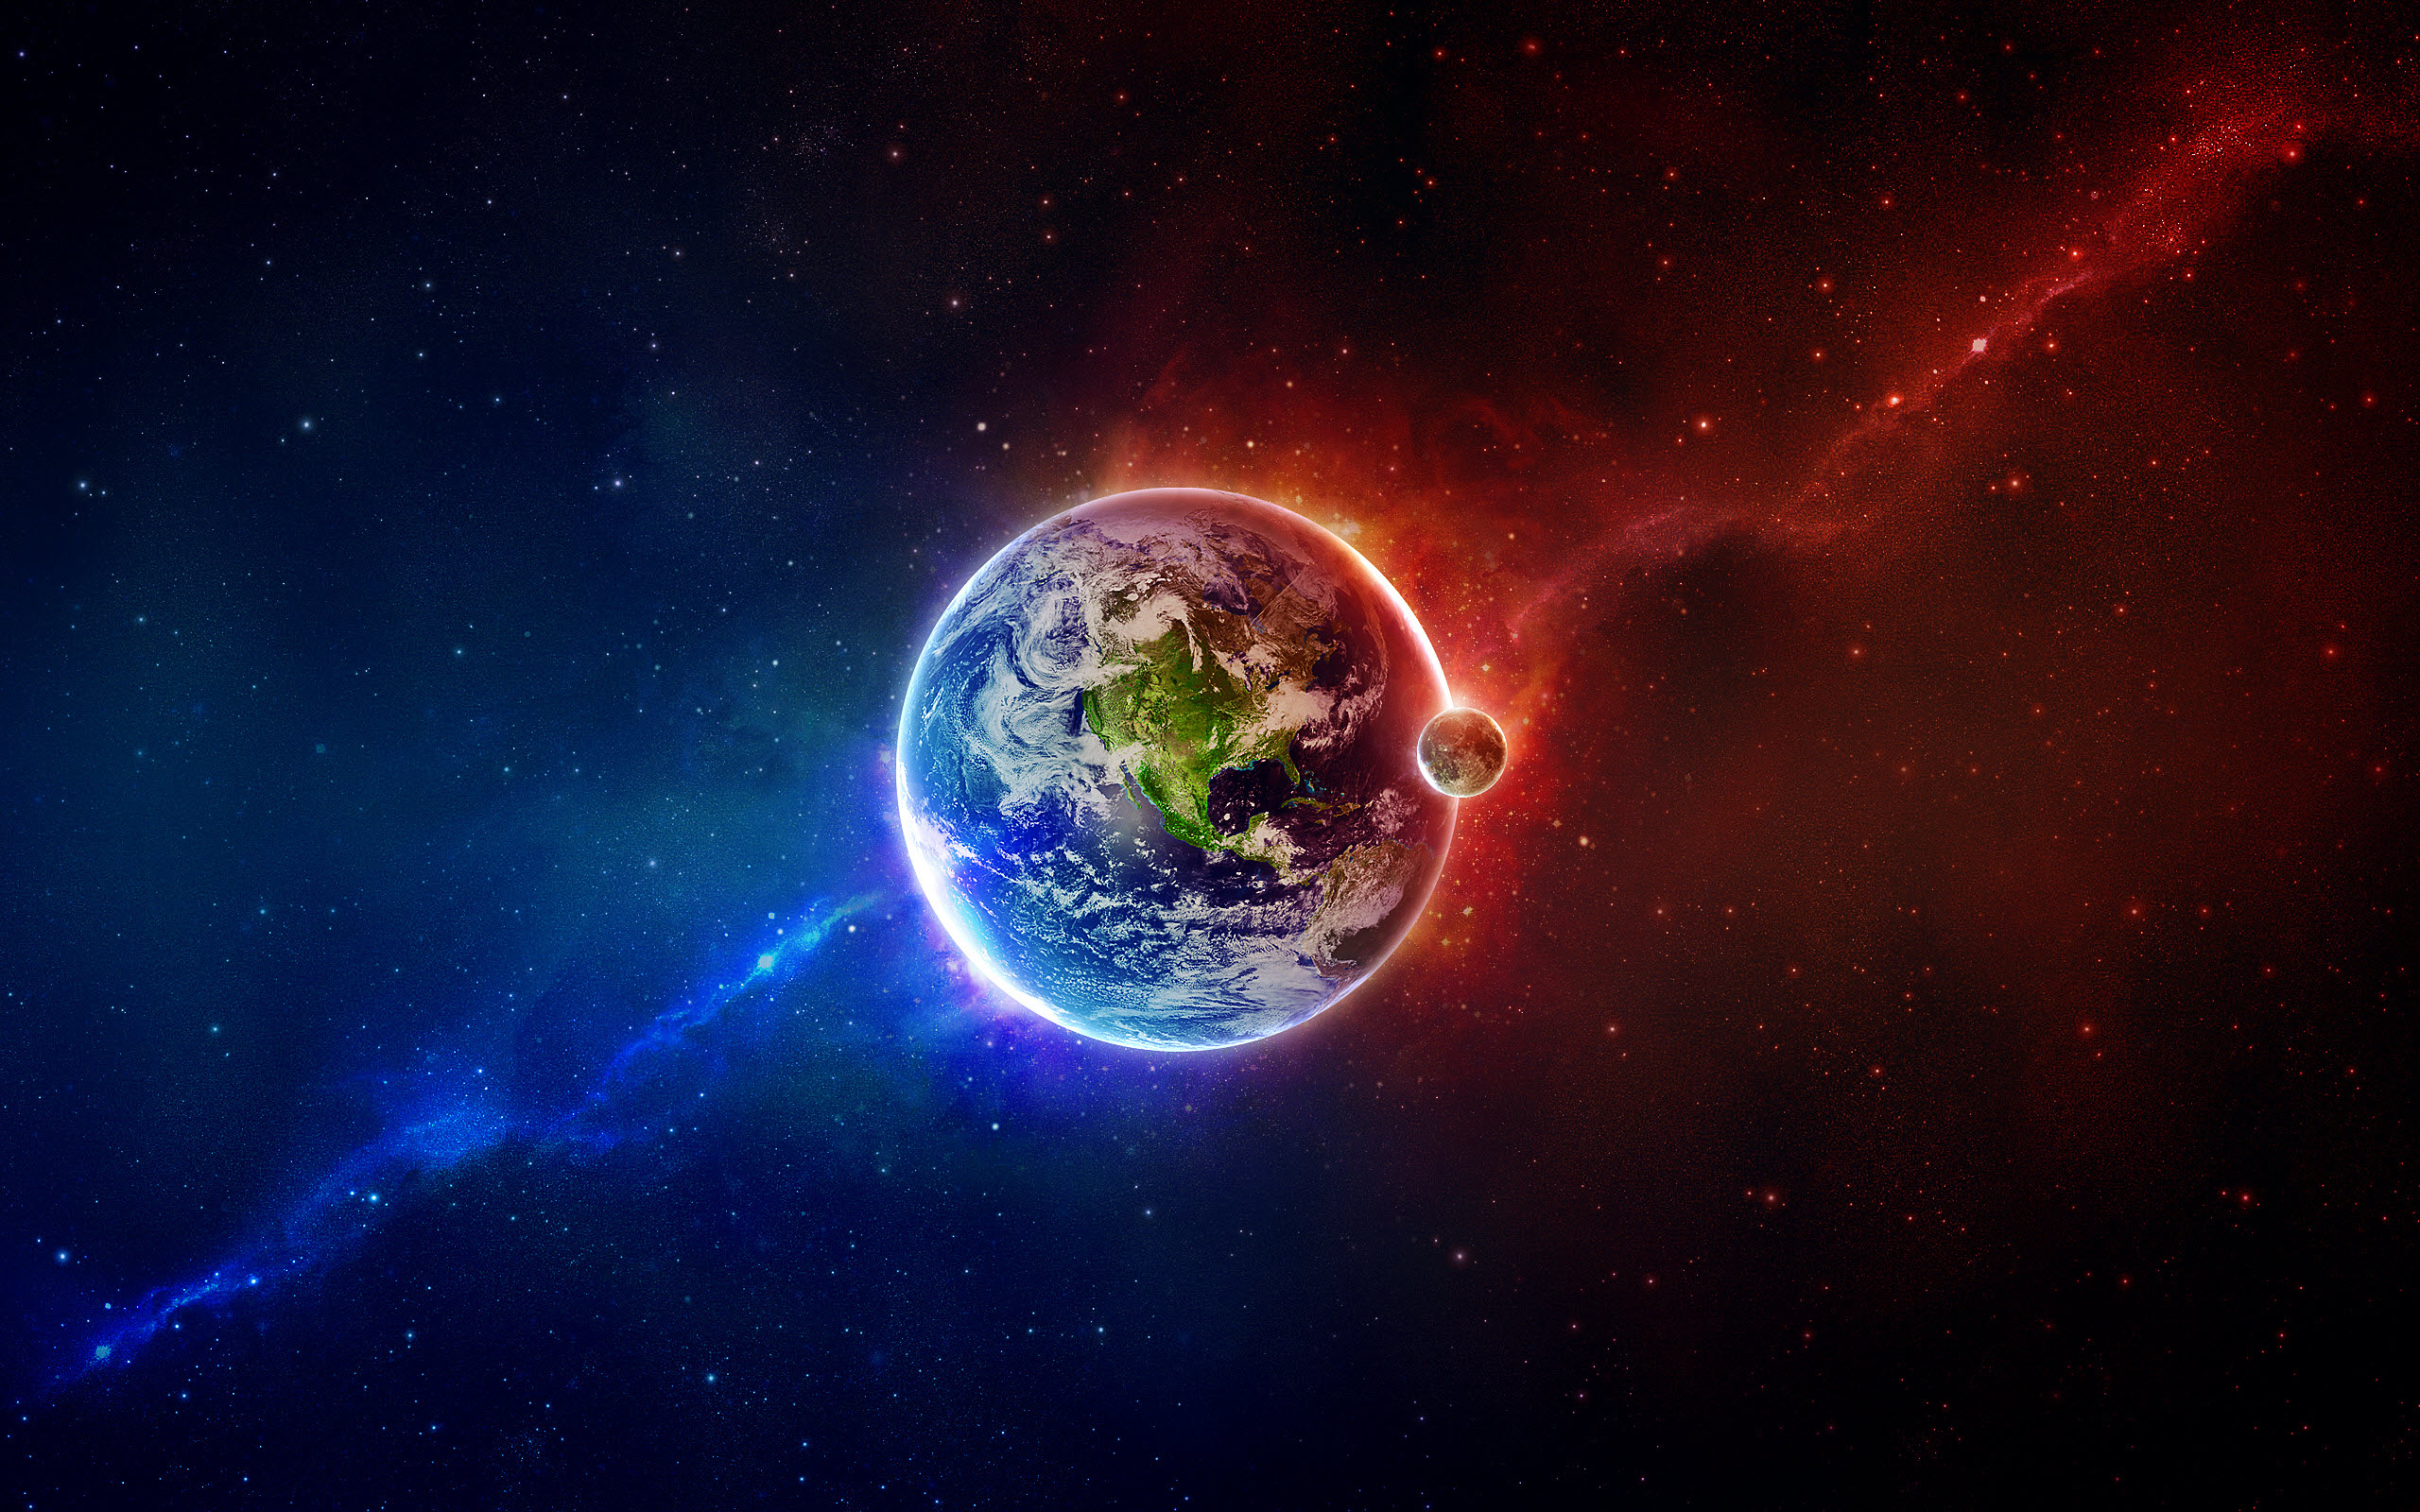 2560x1600 33 Free HD Universe Backgrounds For Desktops, Laptops and Tablets